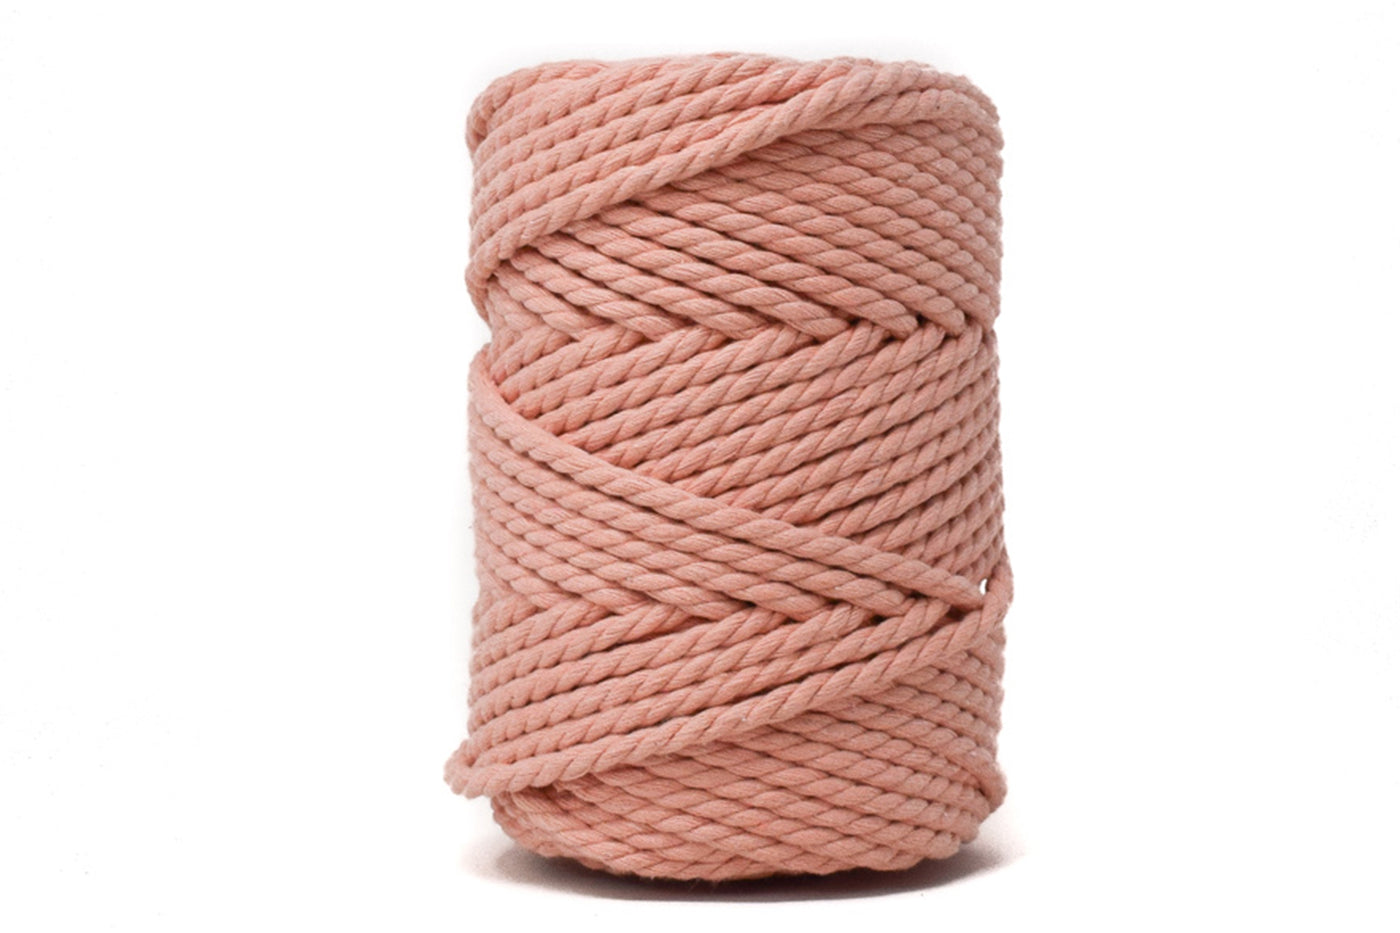 COTTON ROPE ZERO WASTE 5 MM - 3 PLY - SHERBET COLOR